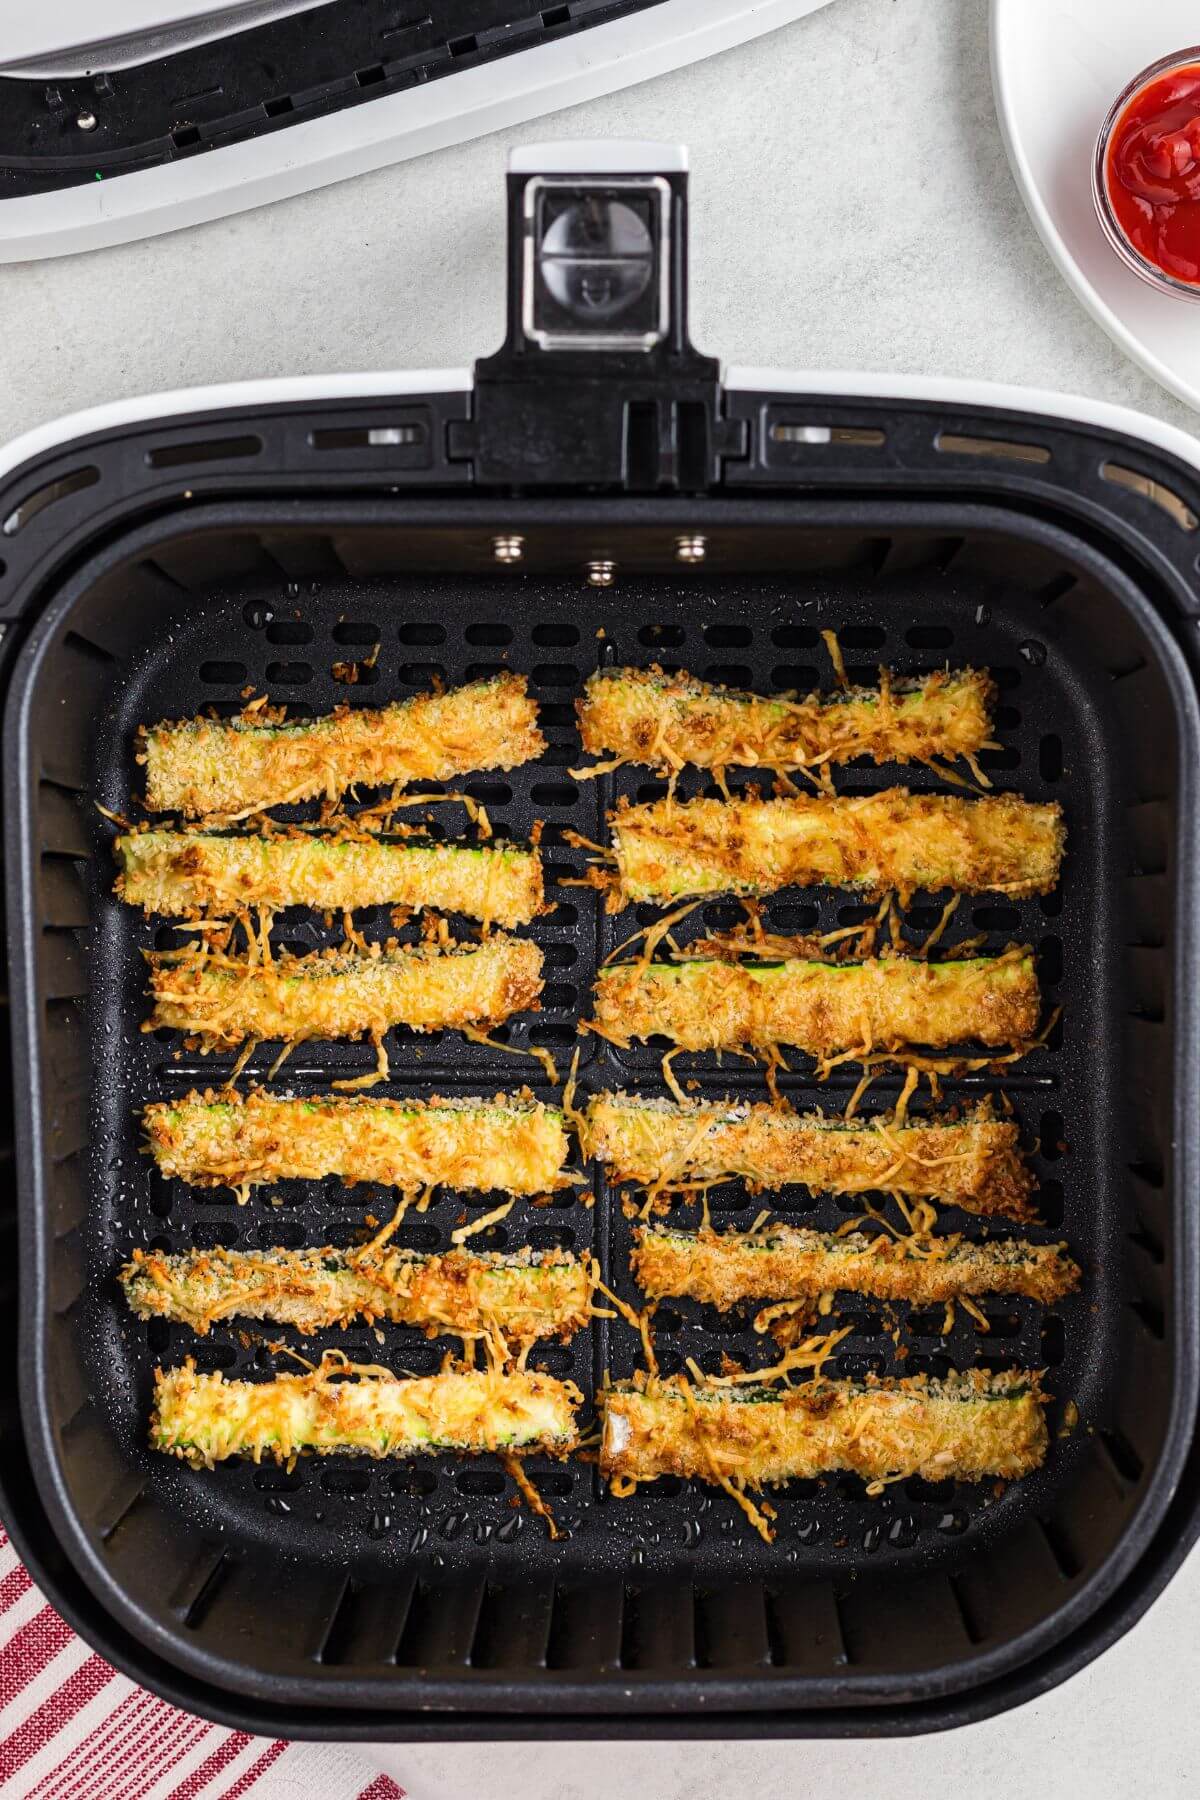 Crispy golden brown cheesy zucchini fries in the air fryer basket after being cooked. 